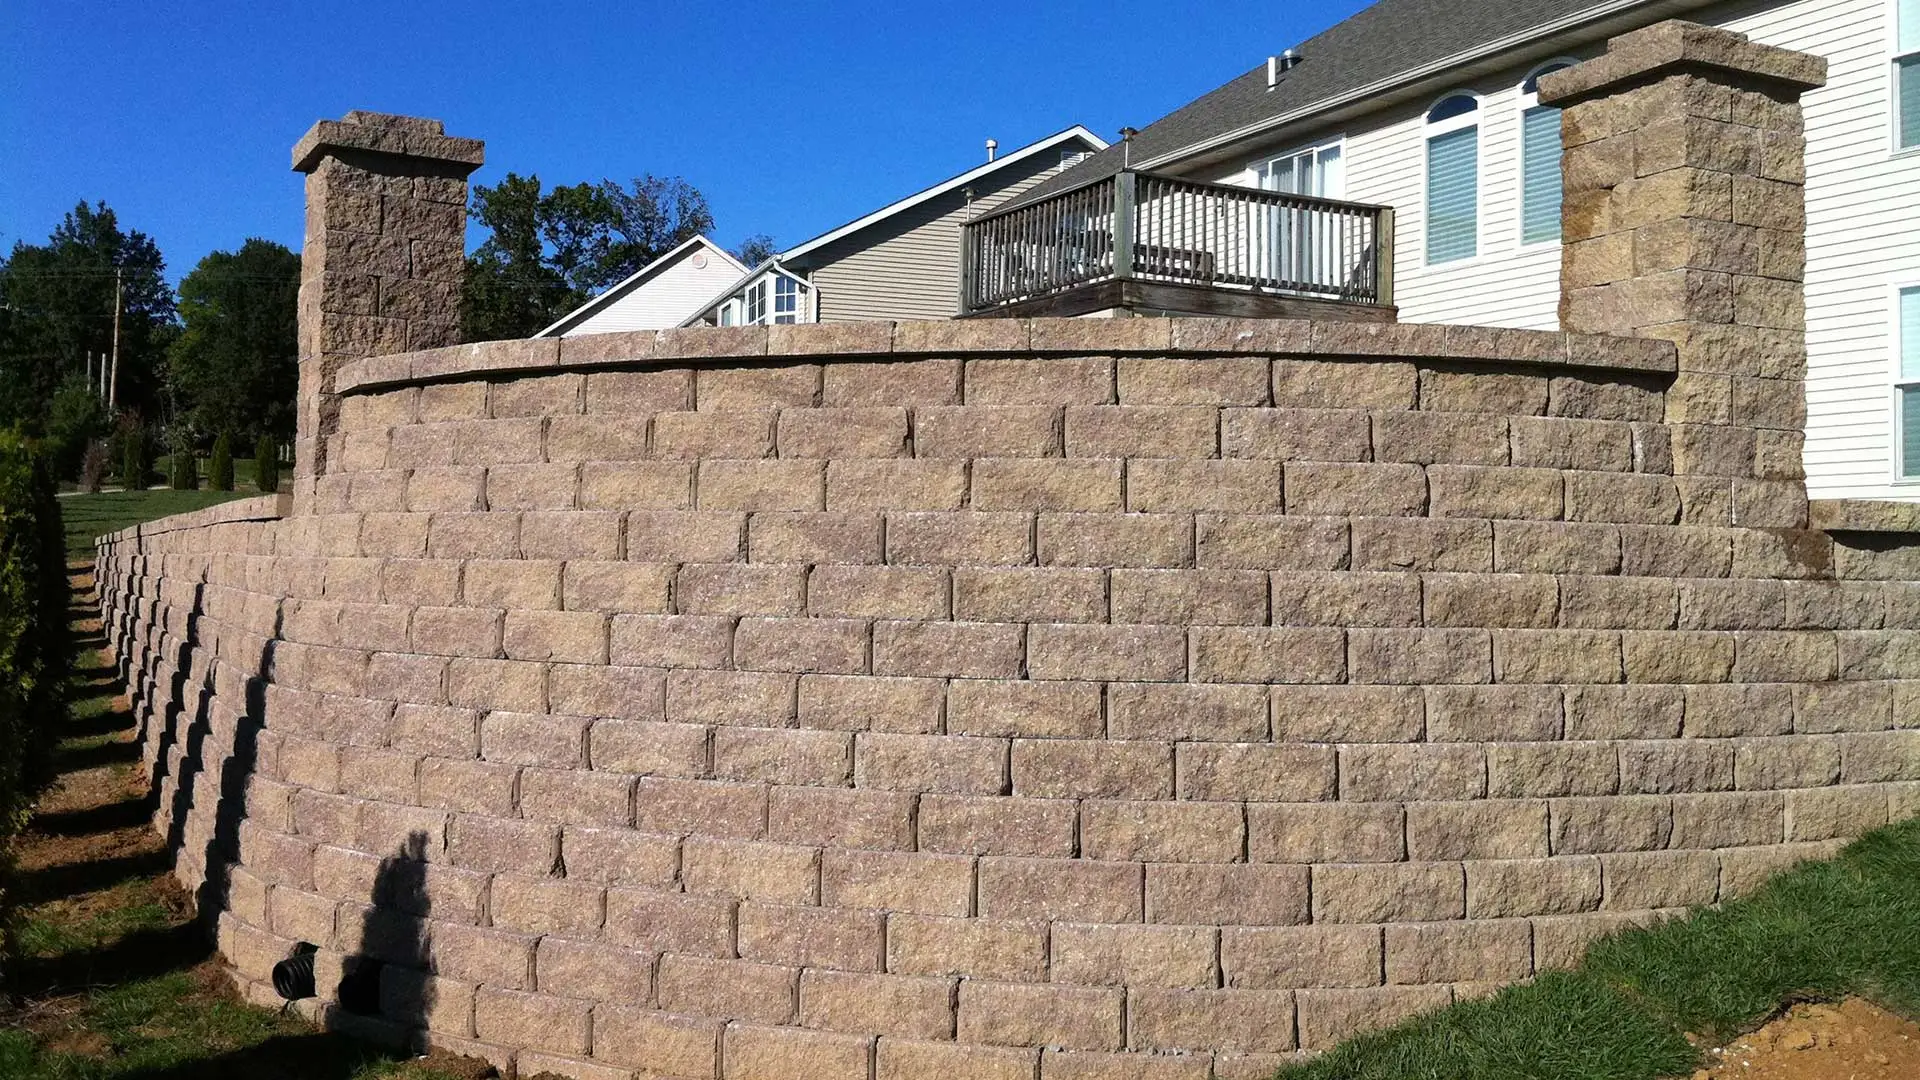 Retaining wall installed at a home in Columbia, IL.